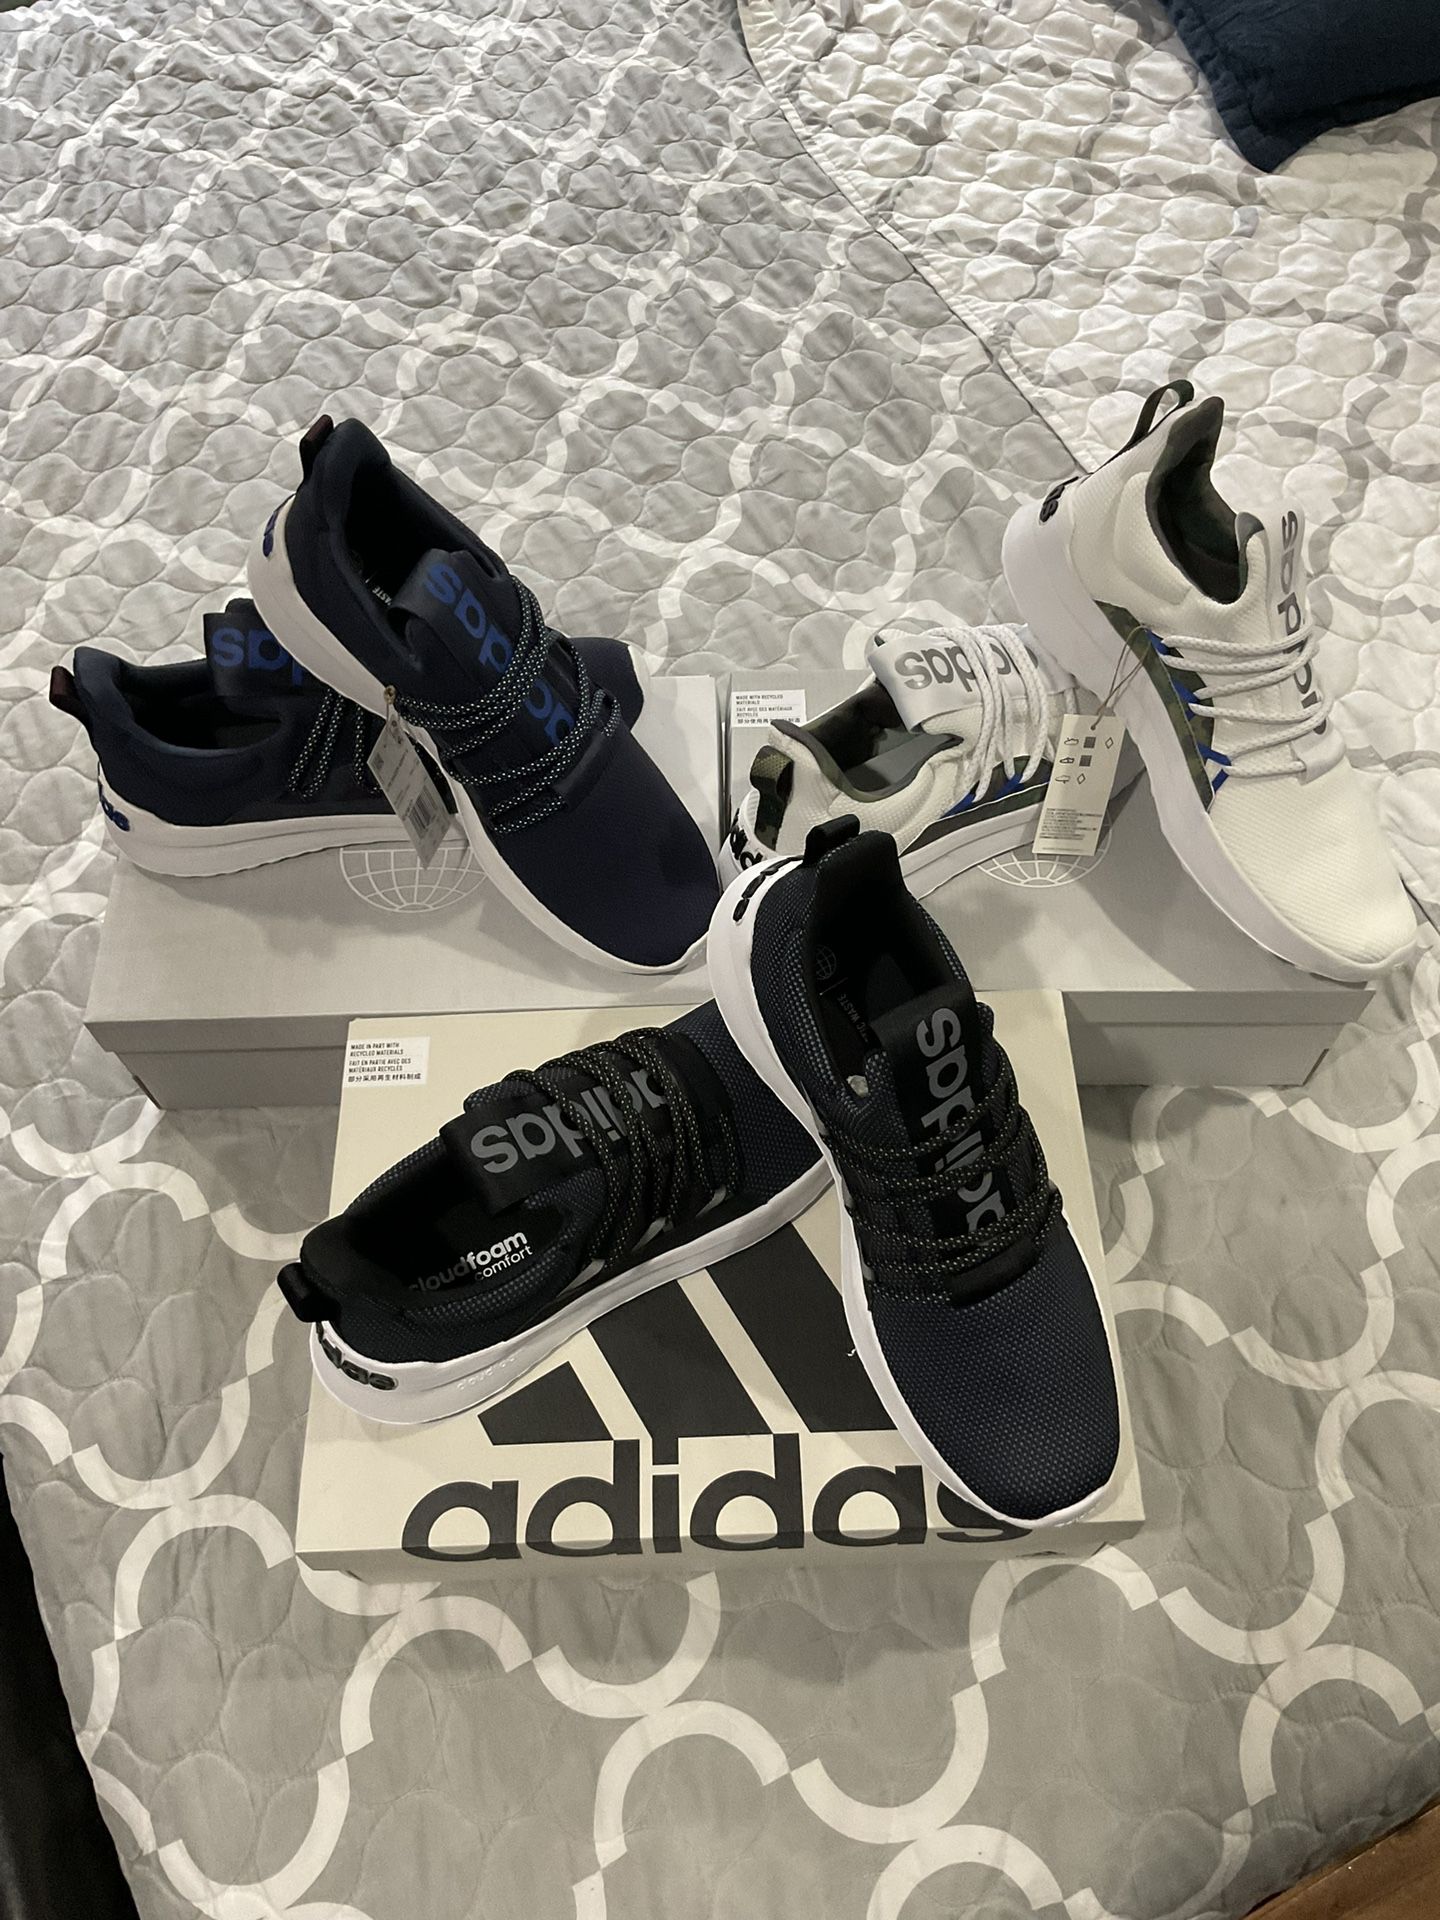 3 PAIRS OF ADIDAS SNEAKERS SIZE 11 1/2 BRAND NEW. $30 EACH. 